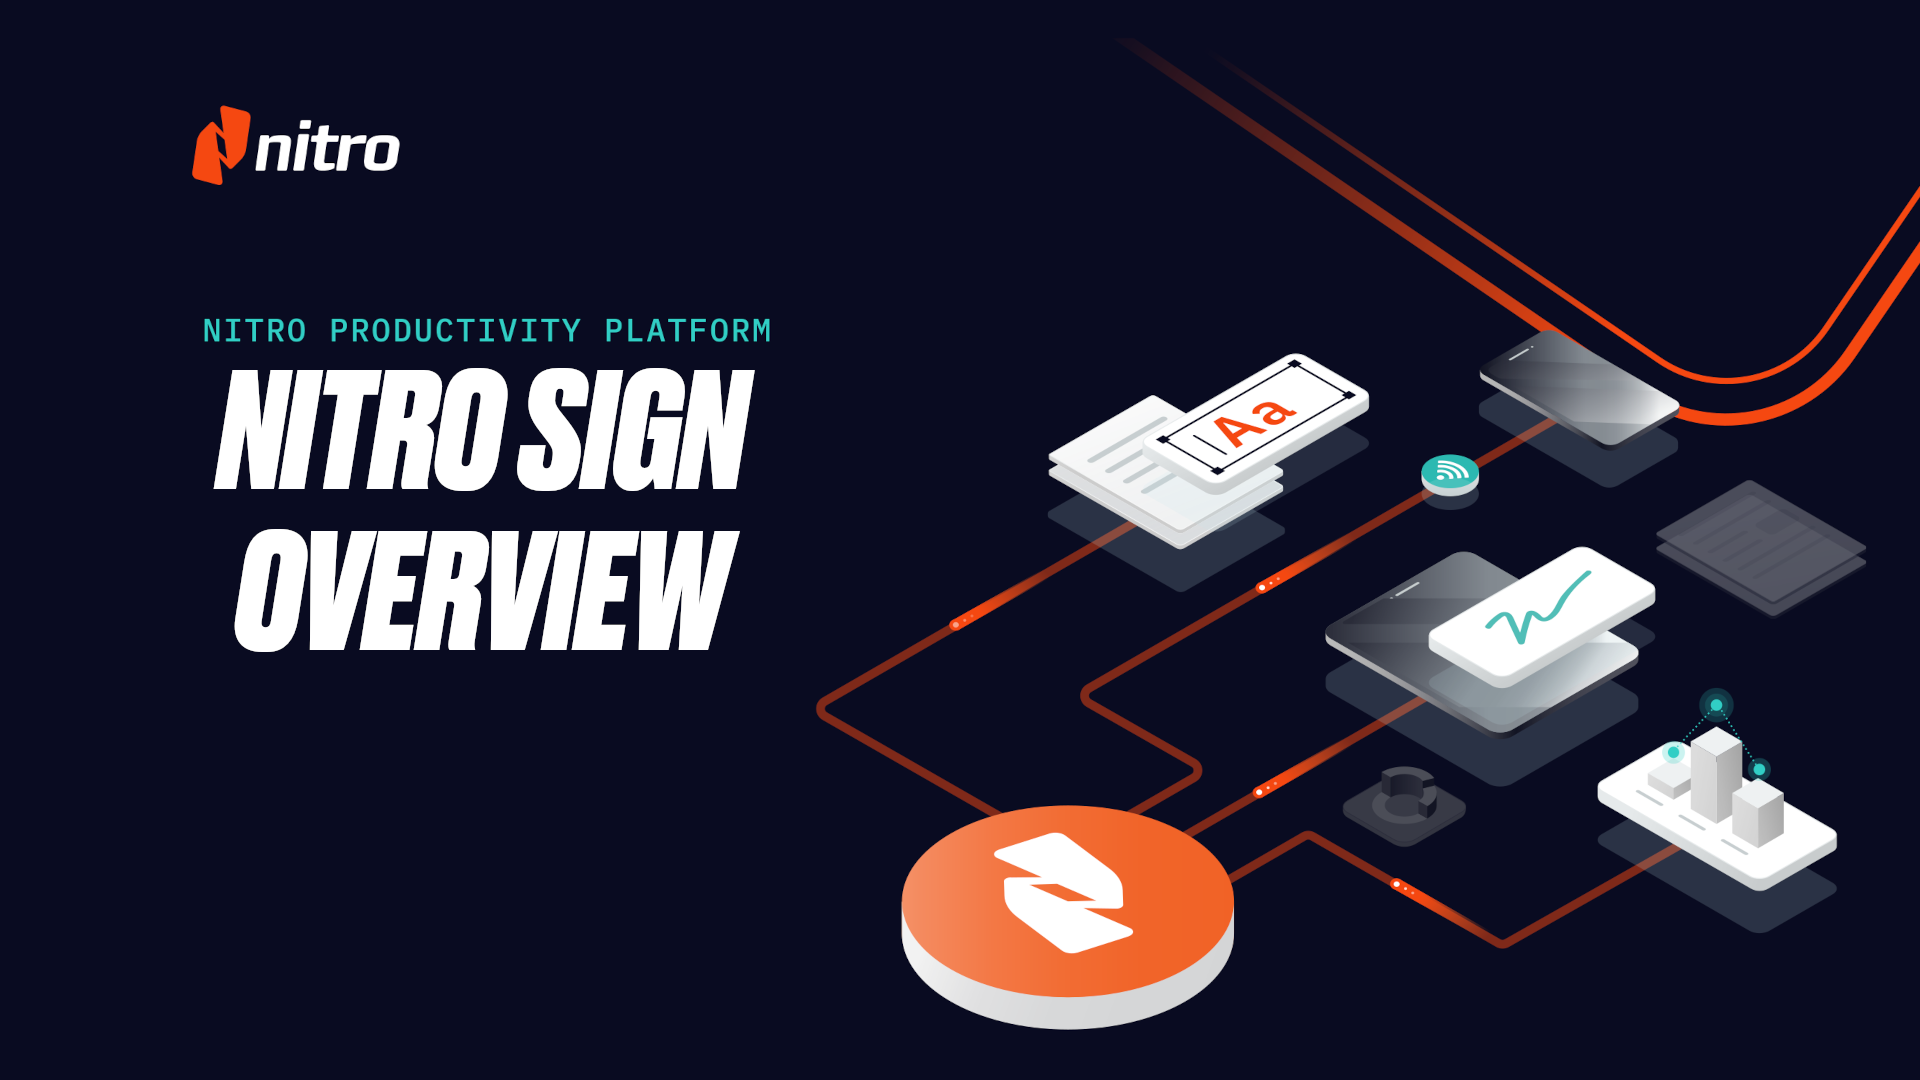 Nitro Sign Overview